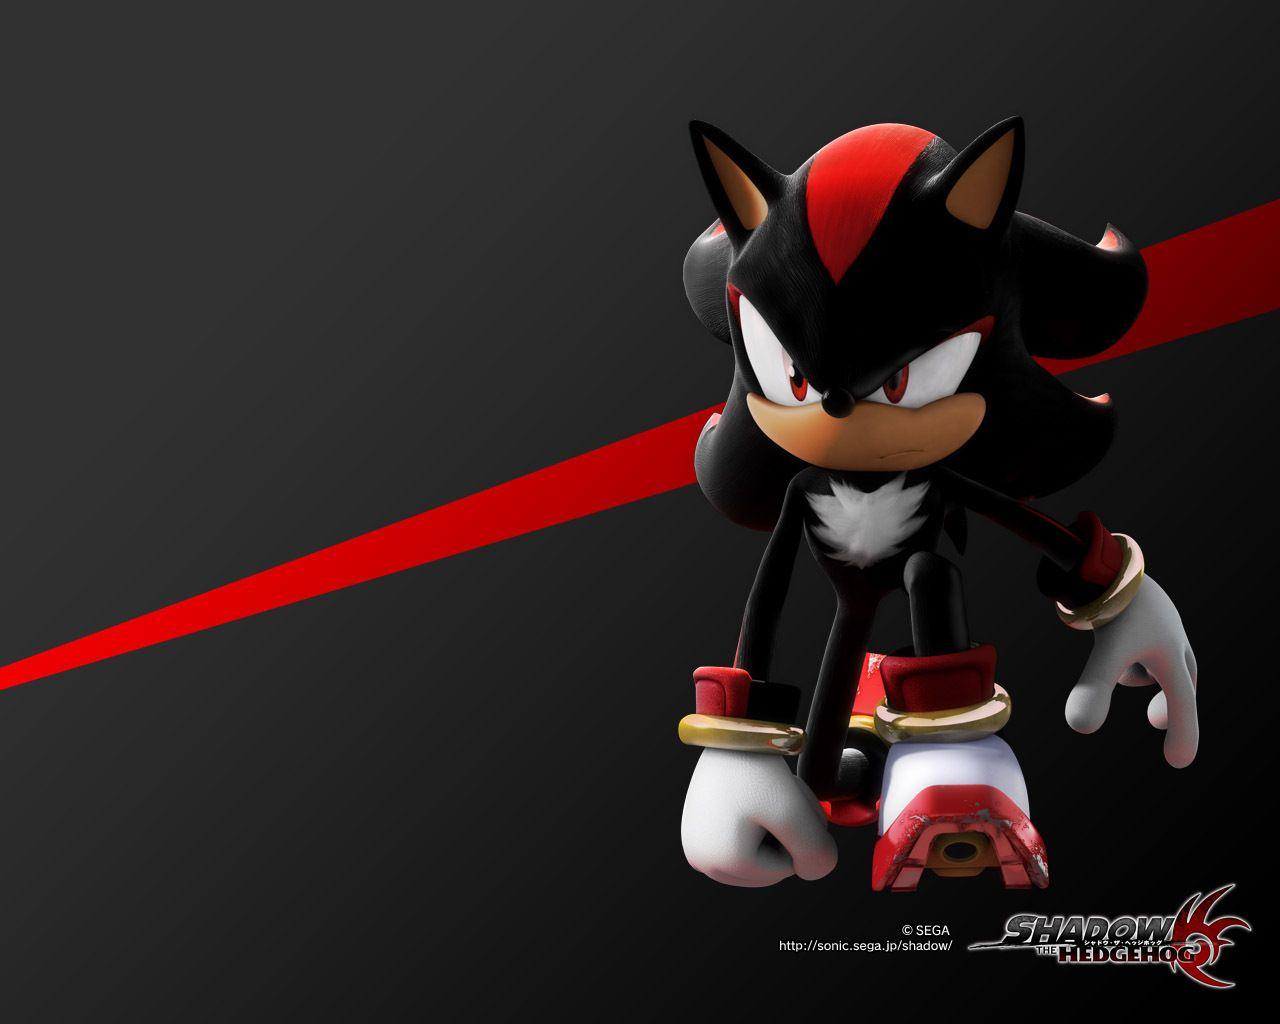 1000+ image about Shadow The Hedgehog